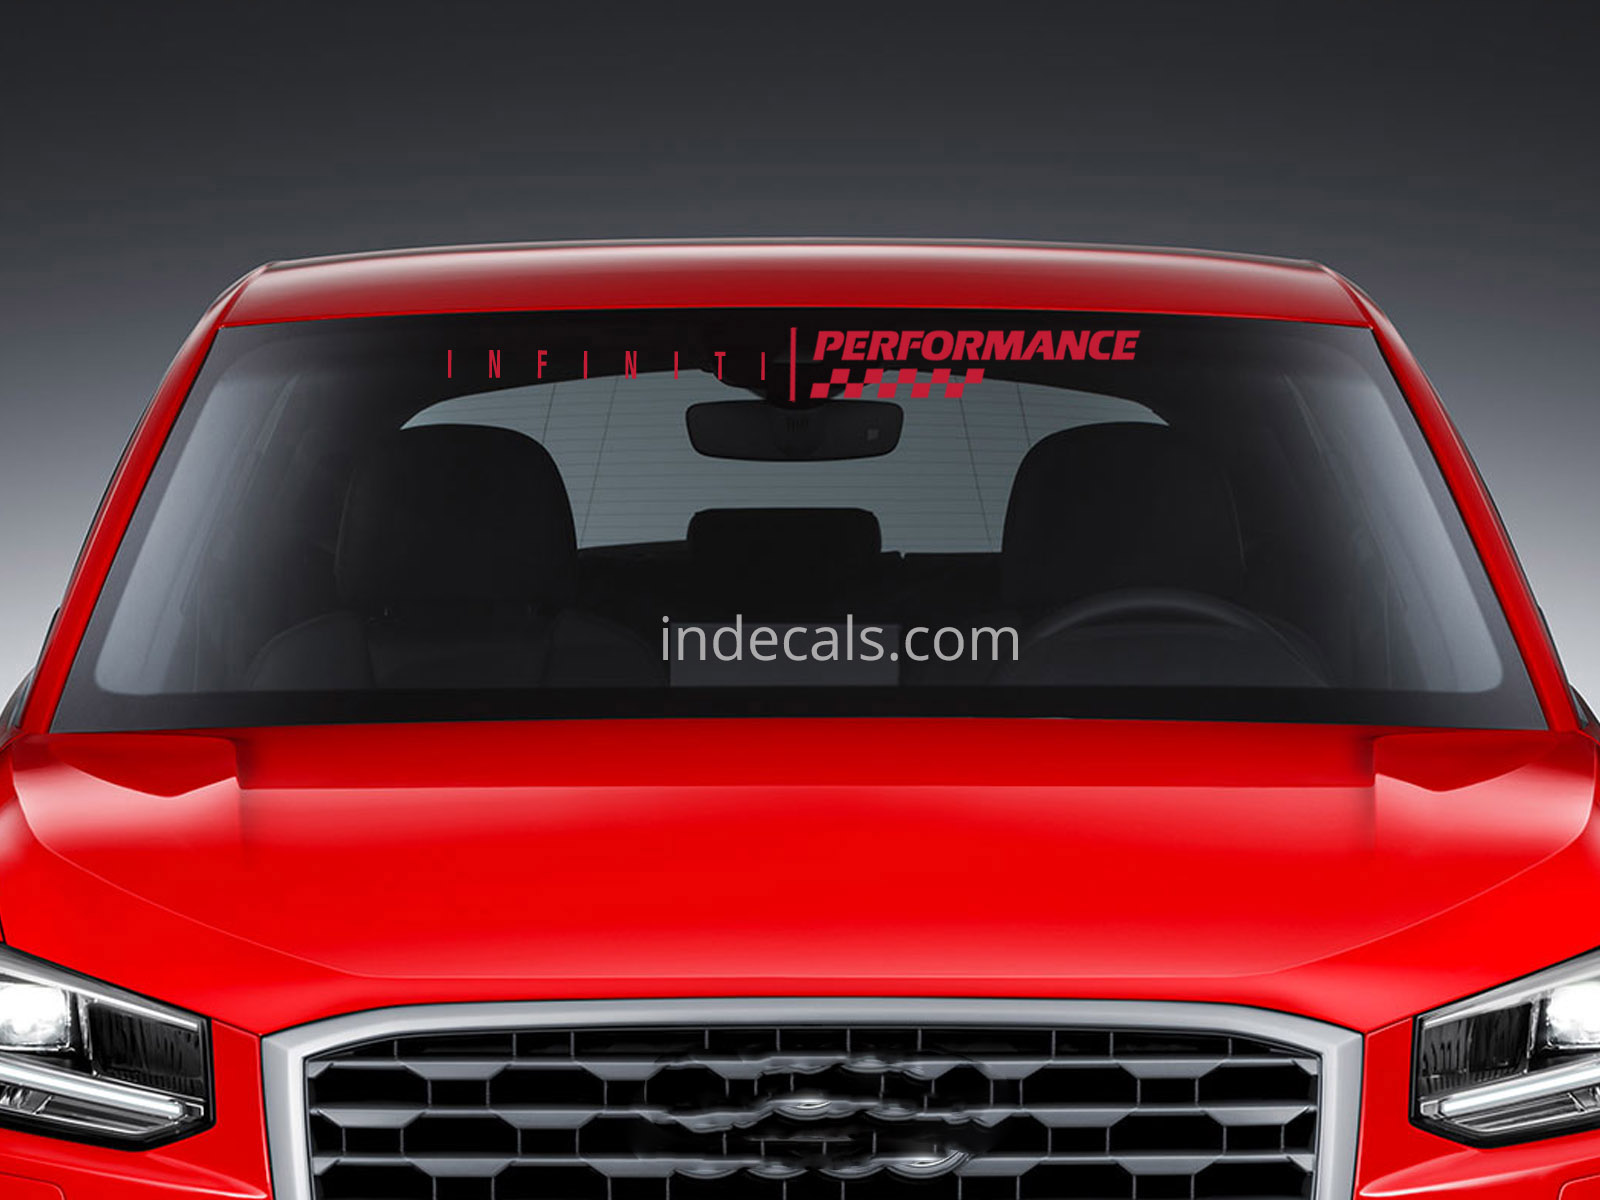 1 x Infiniti Performance Sticker for Windshield or Back Window - Red